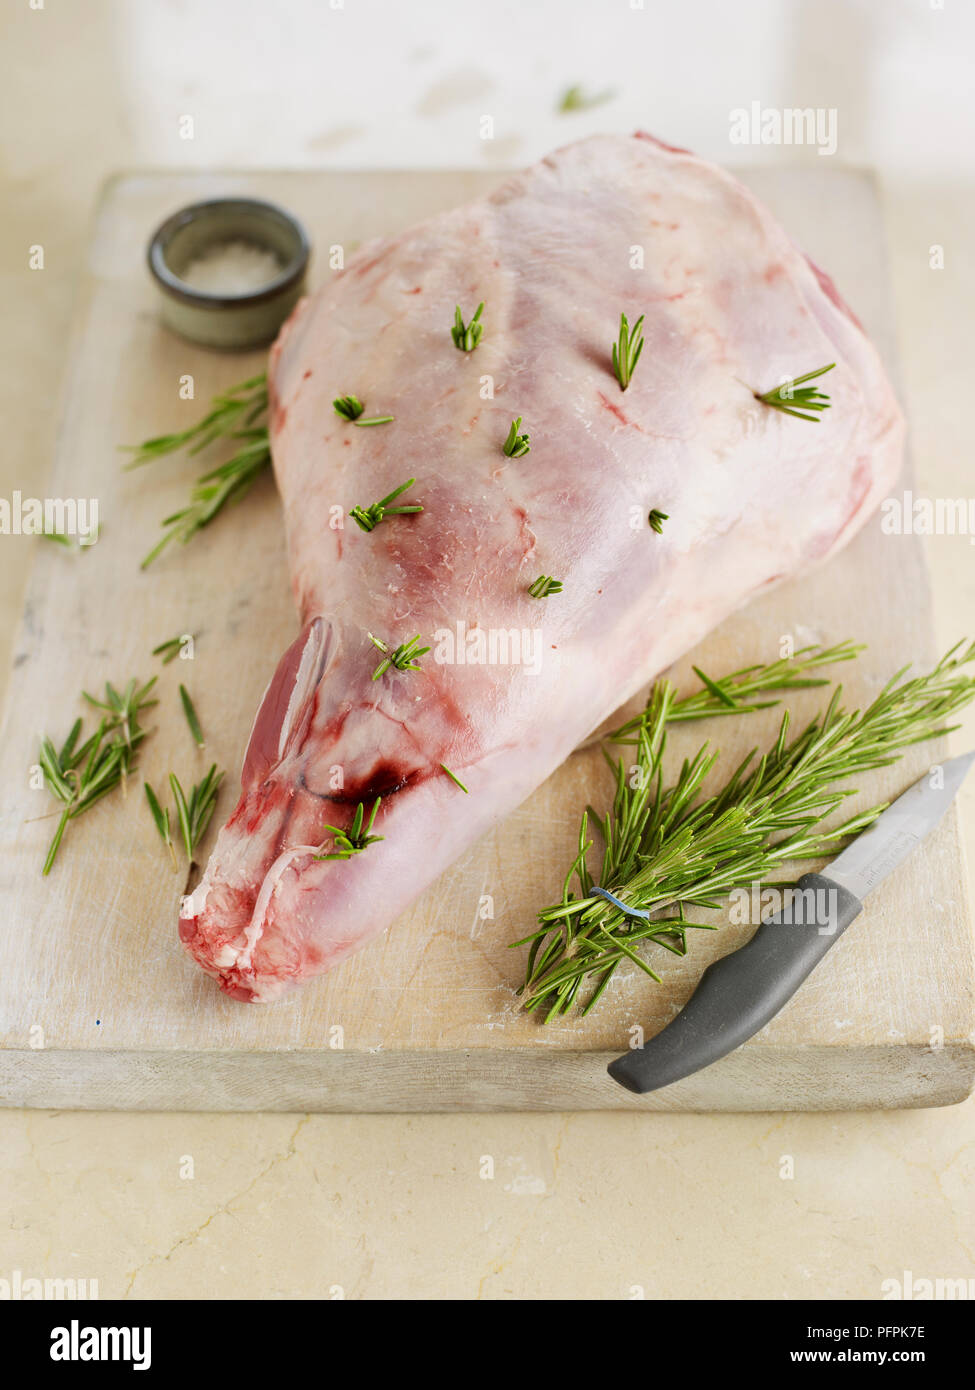 Leg of lamb studded with sprigs of rosemary Stock Photo